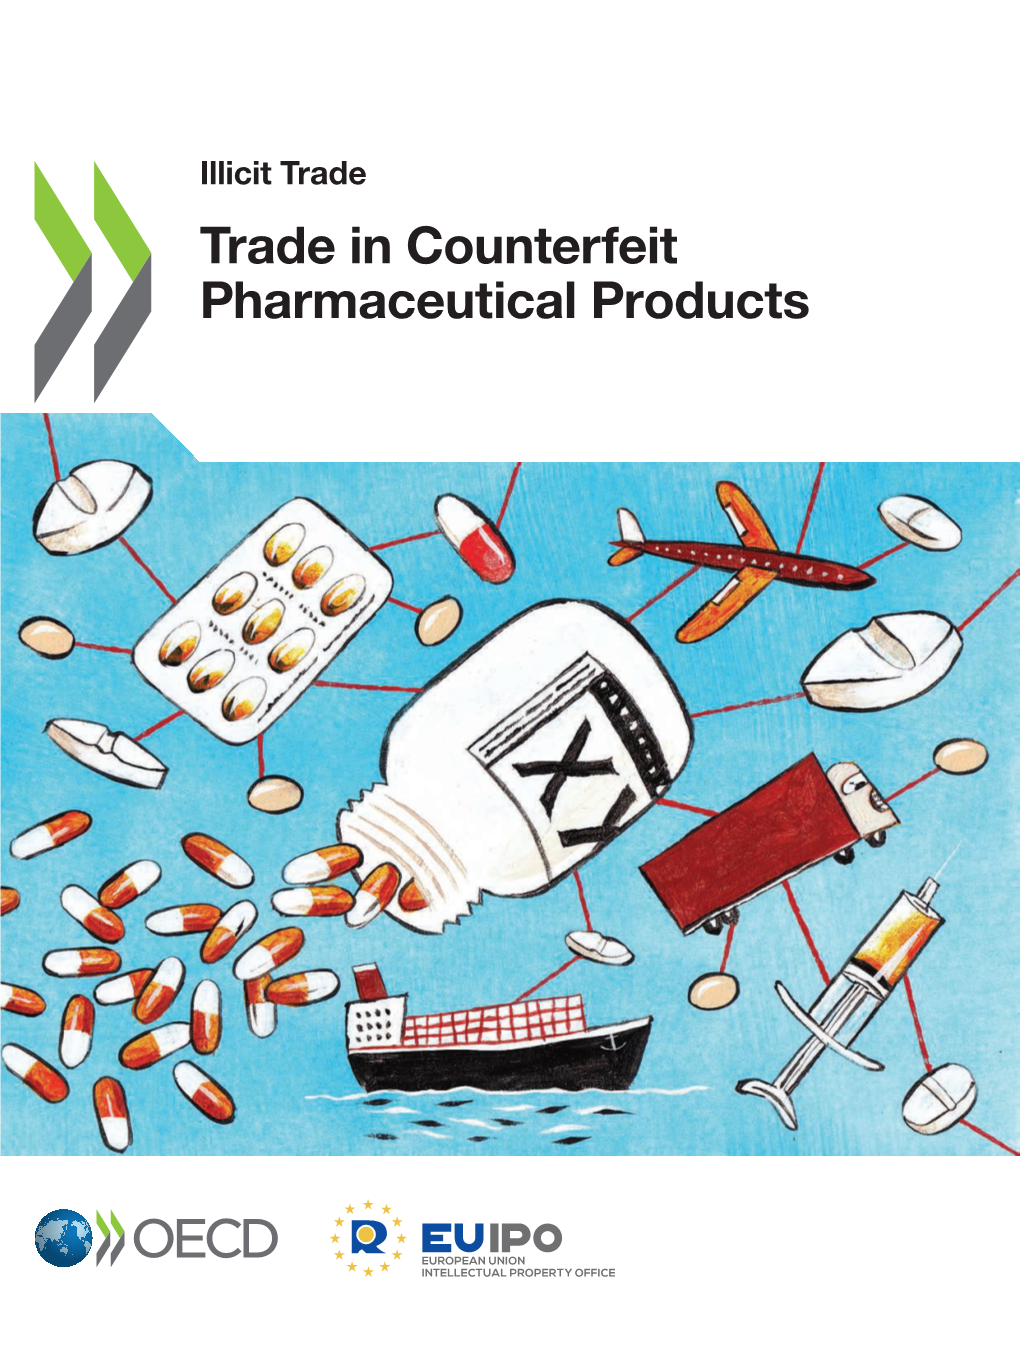 Illicit Trade Trade in Counterfeit Pharmaceutical Products